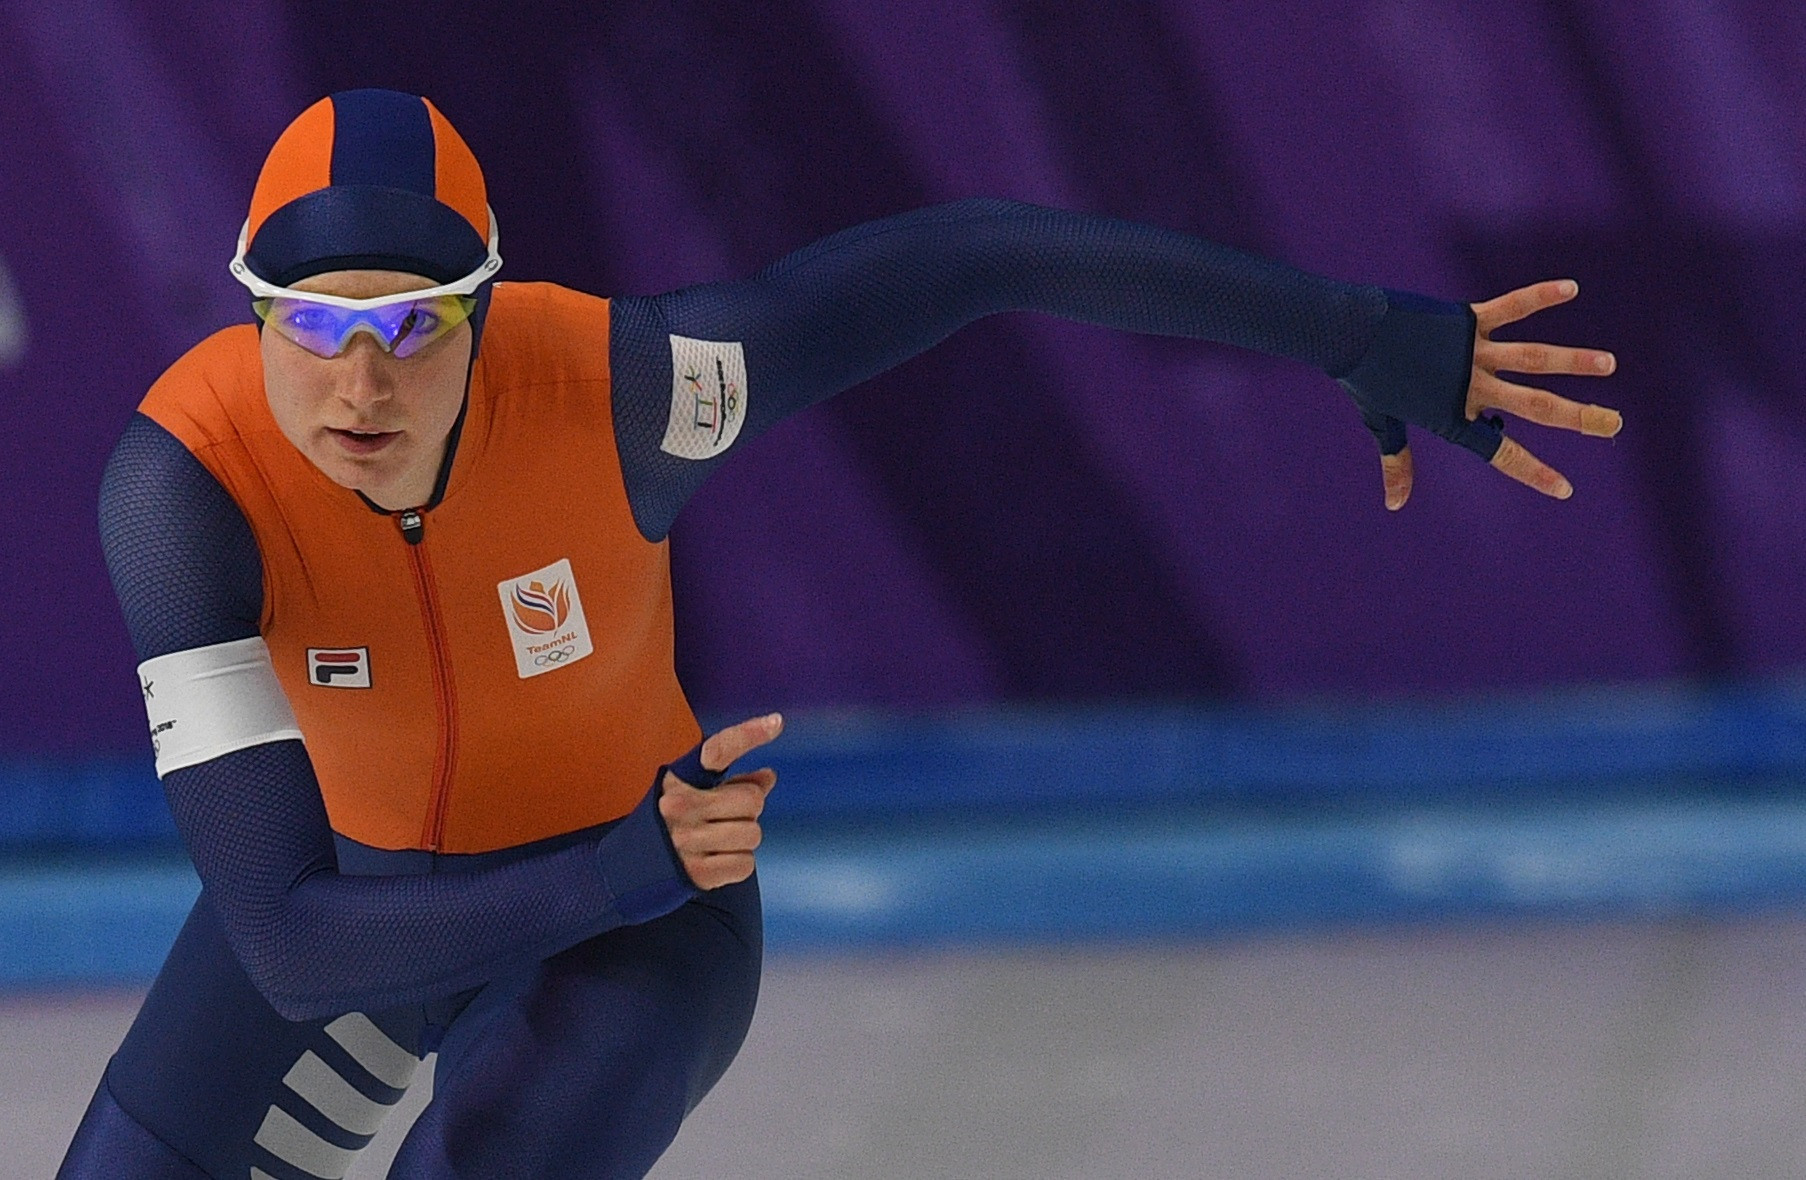 Carlijn Achtereekte led home a Dutch podium sweep in the women's 3,000m speed skating event ©Getty Images